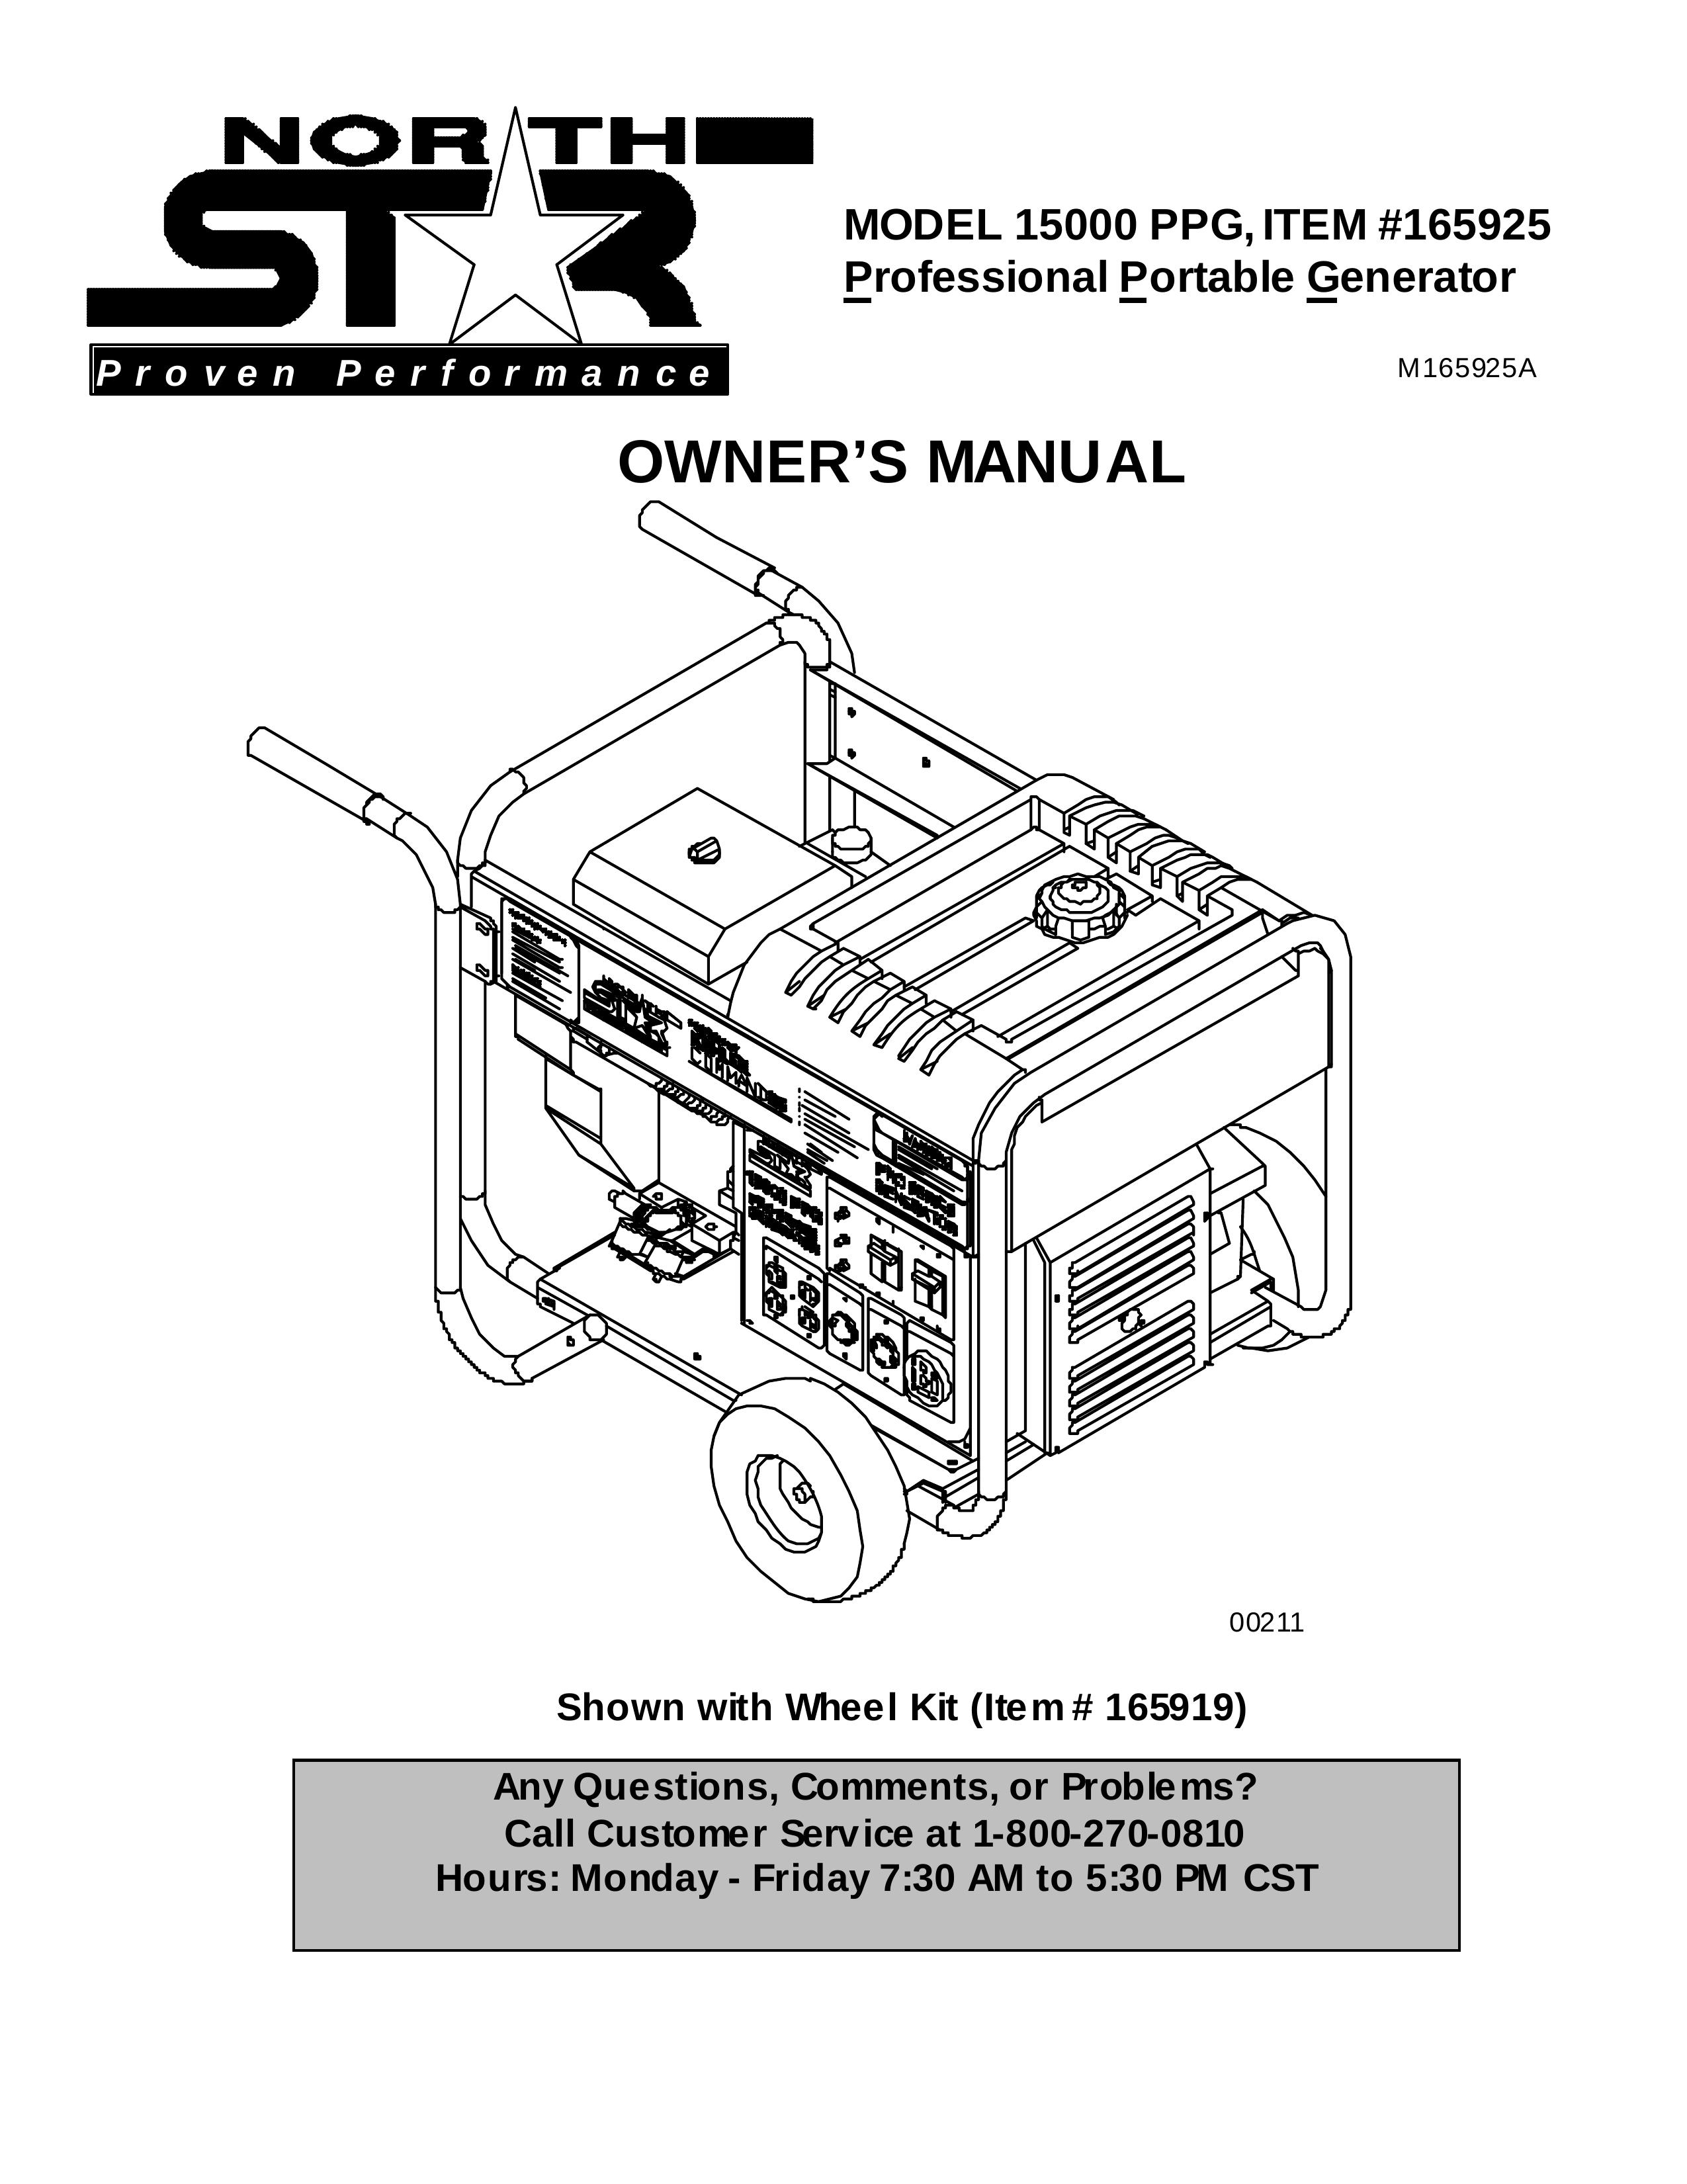 Northern Industrial Tools 15000 PPG Portable Generator User Manual